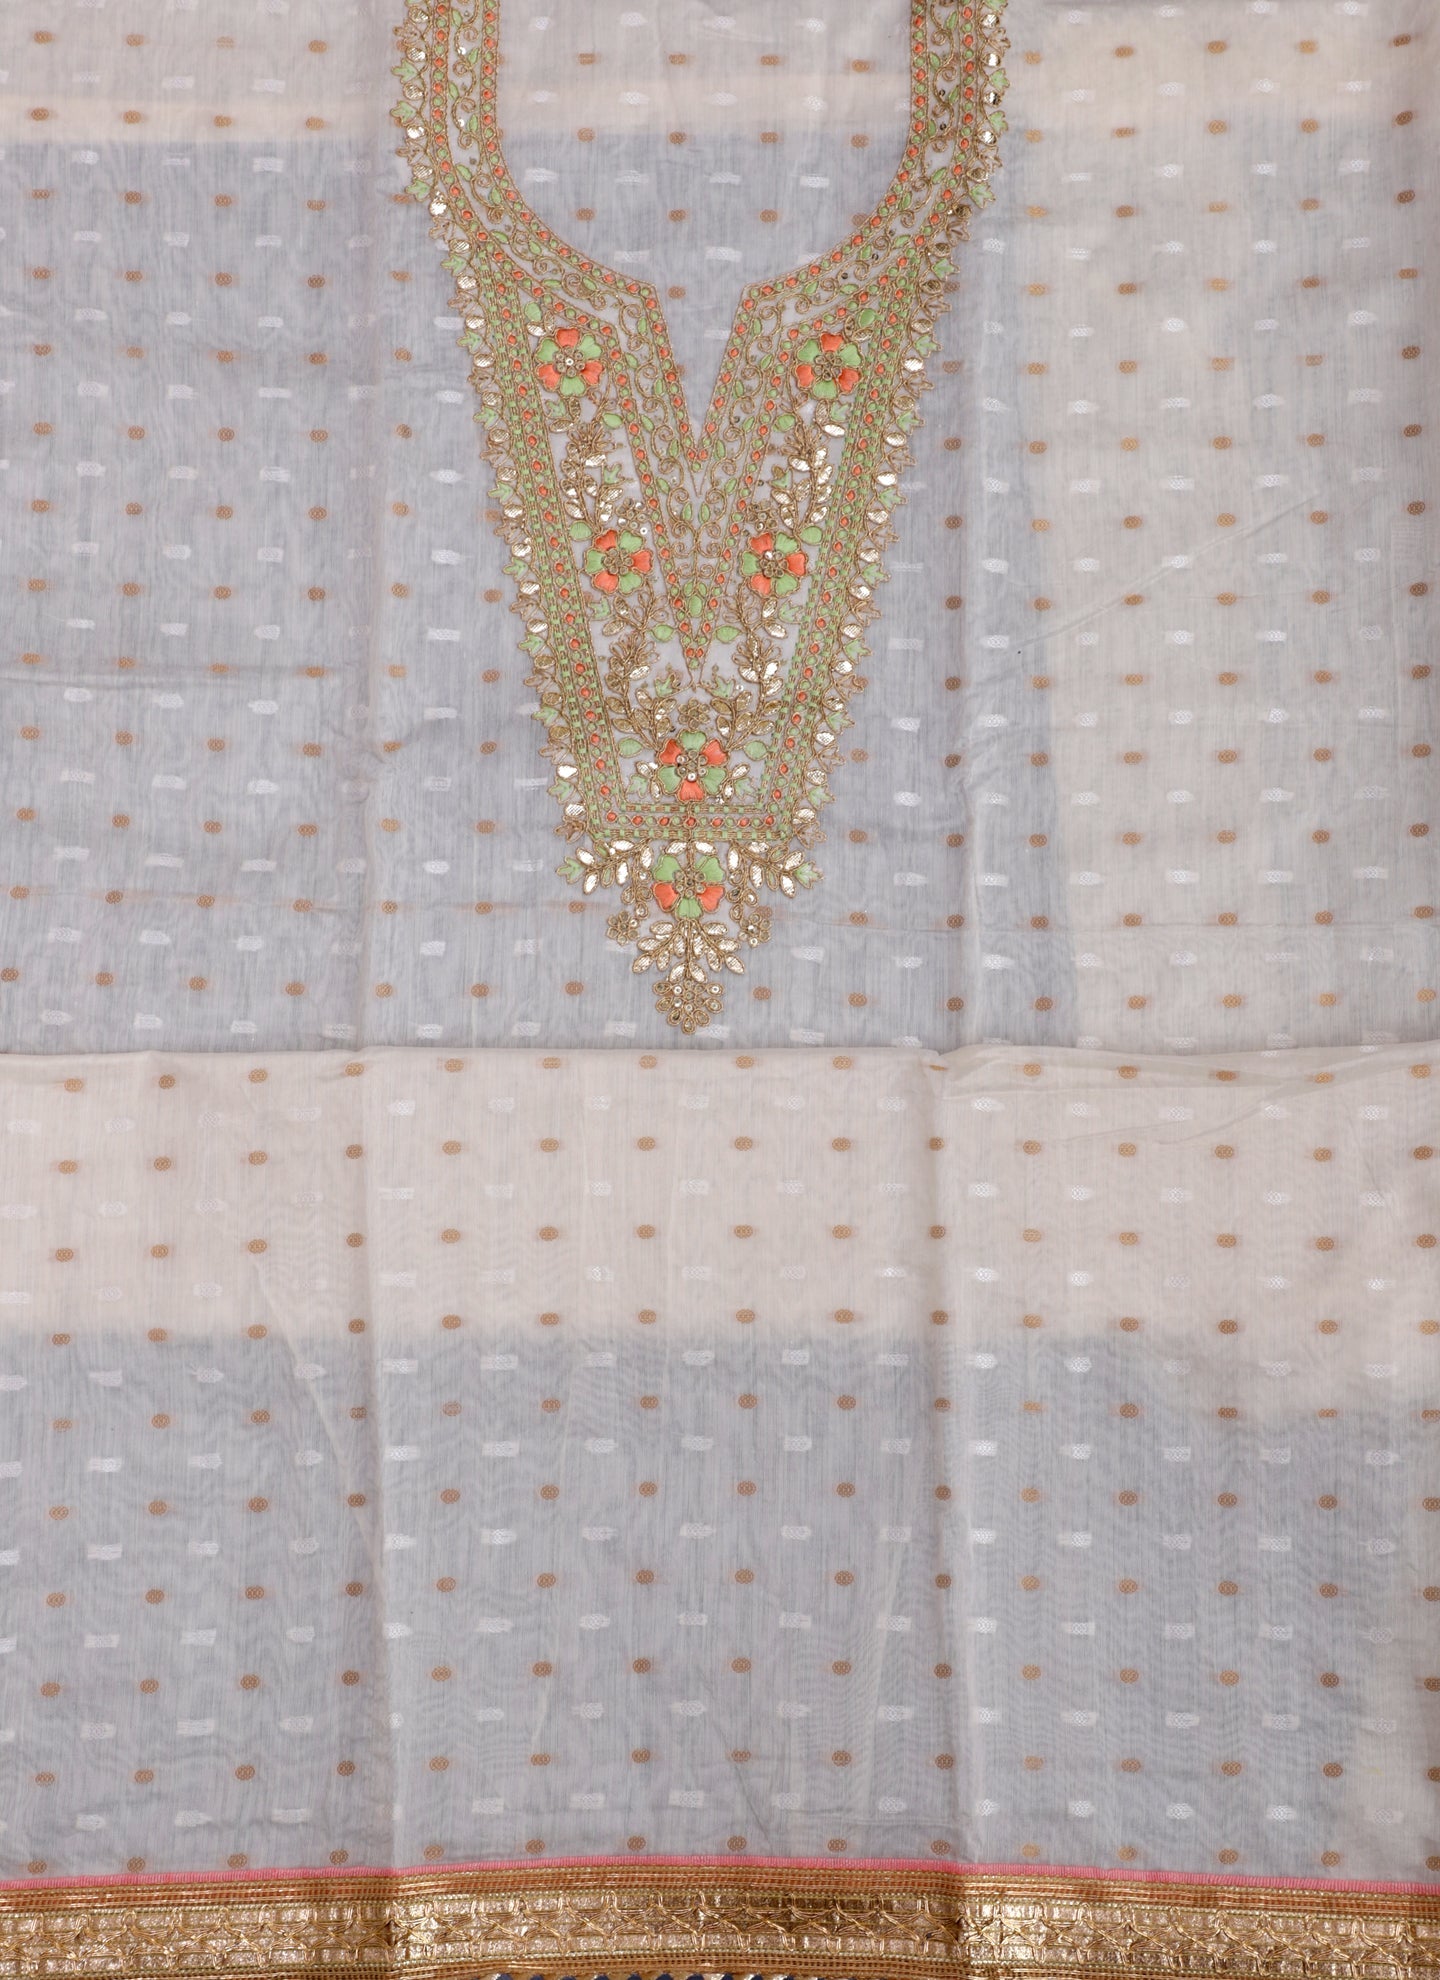 Off White & Green Embroidered Unstitched Dress Material